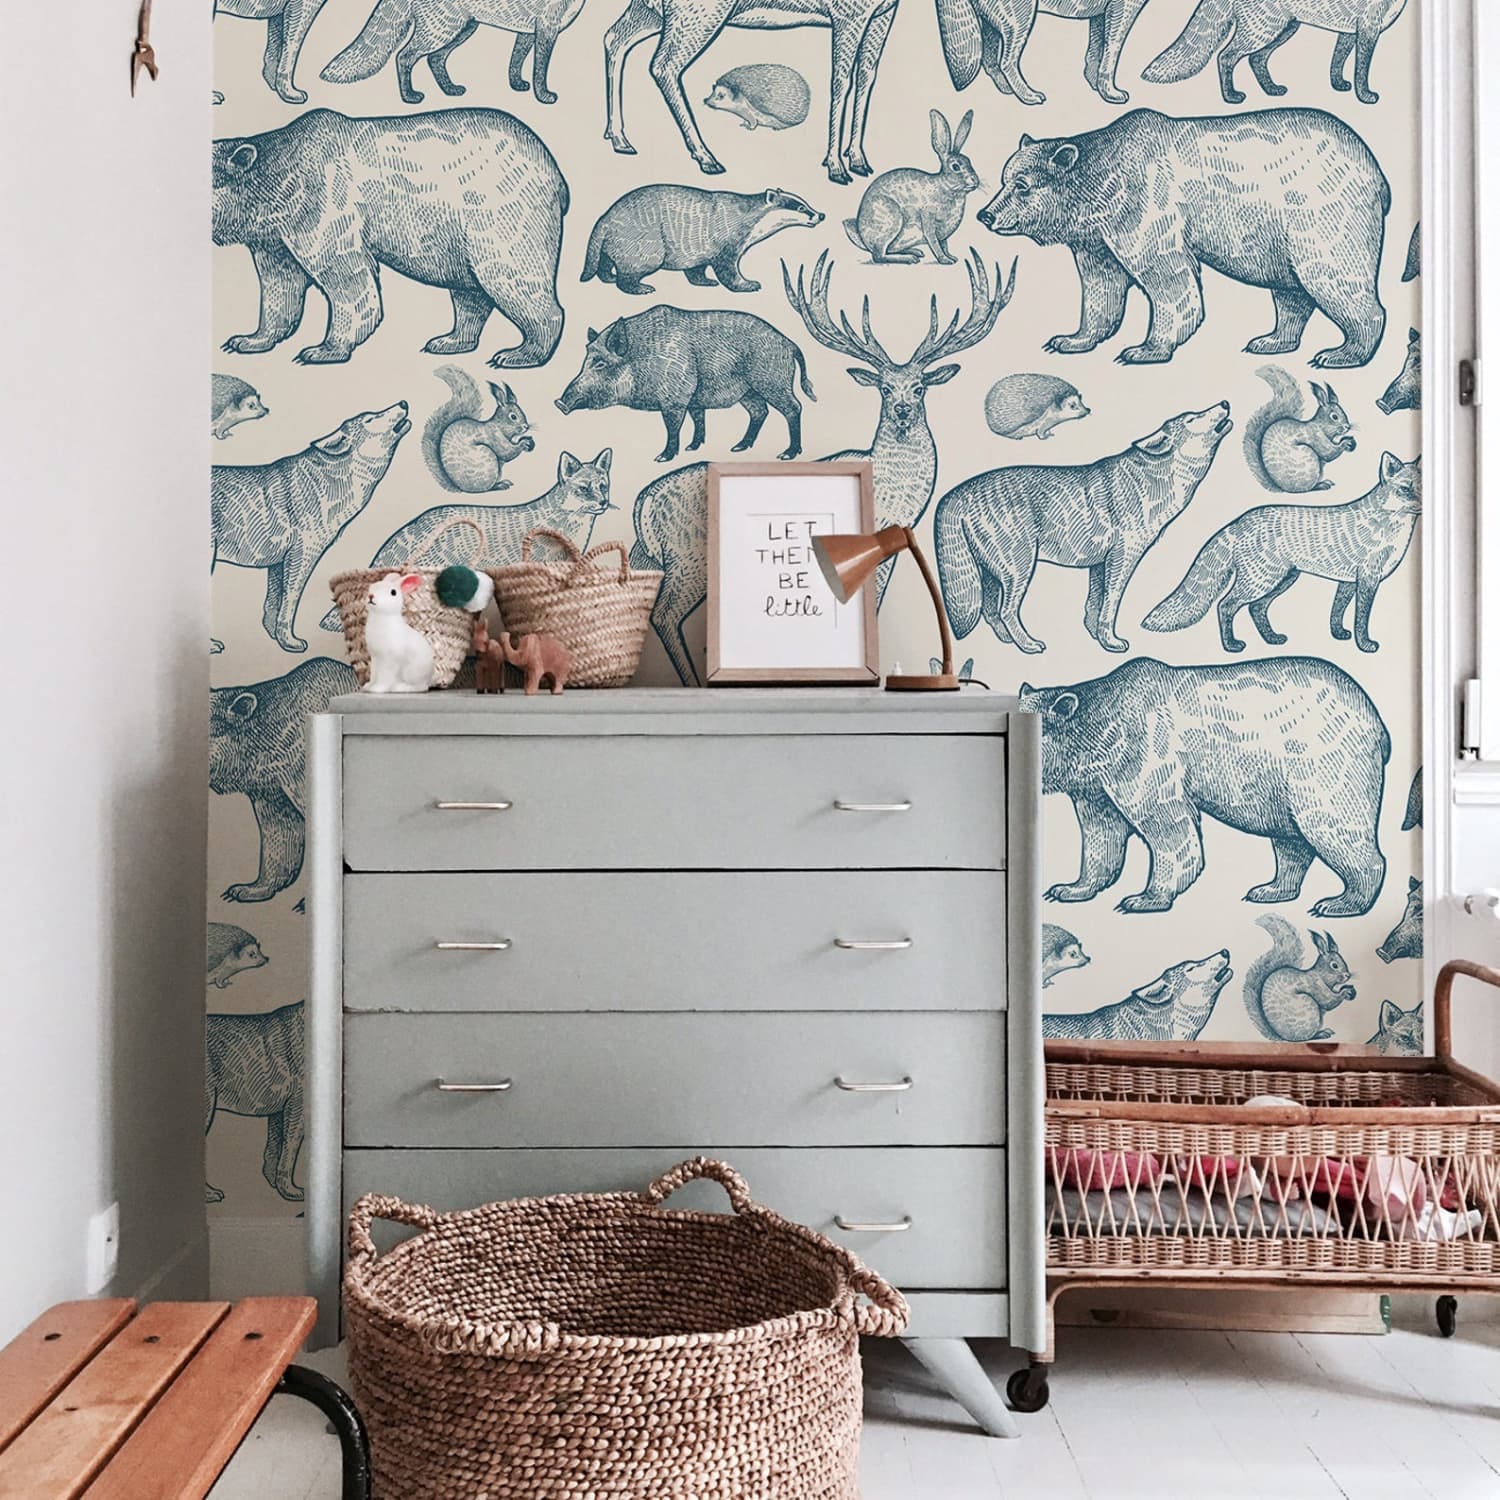 Removable Peel and Stick Wallpaper Ideas for Kids Rooms | Cubby